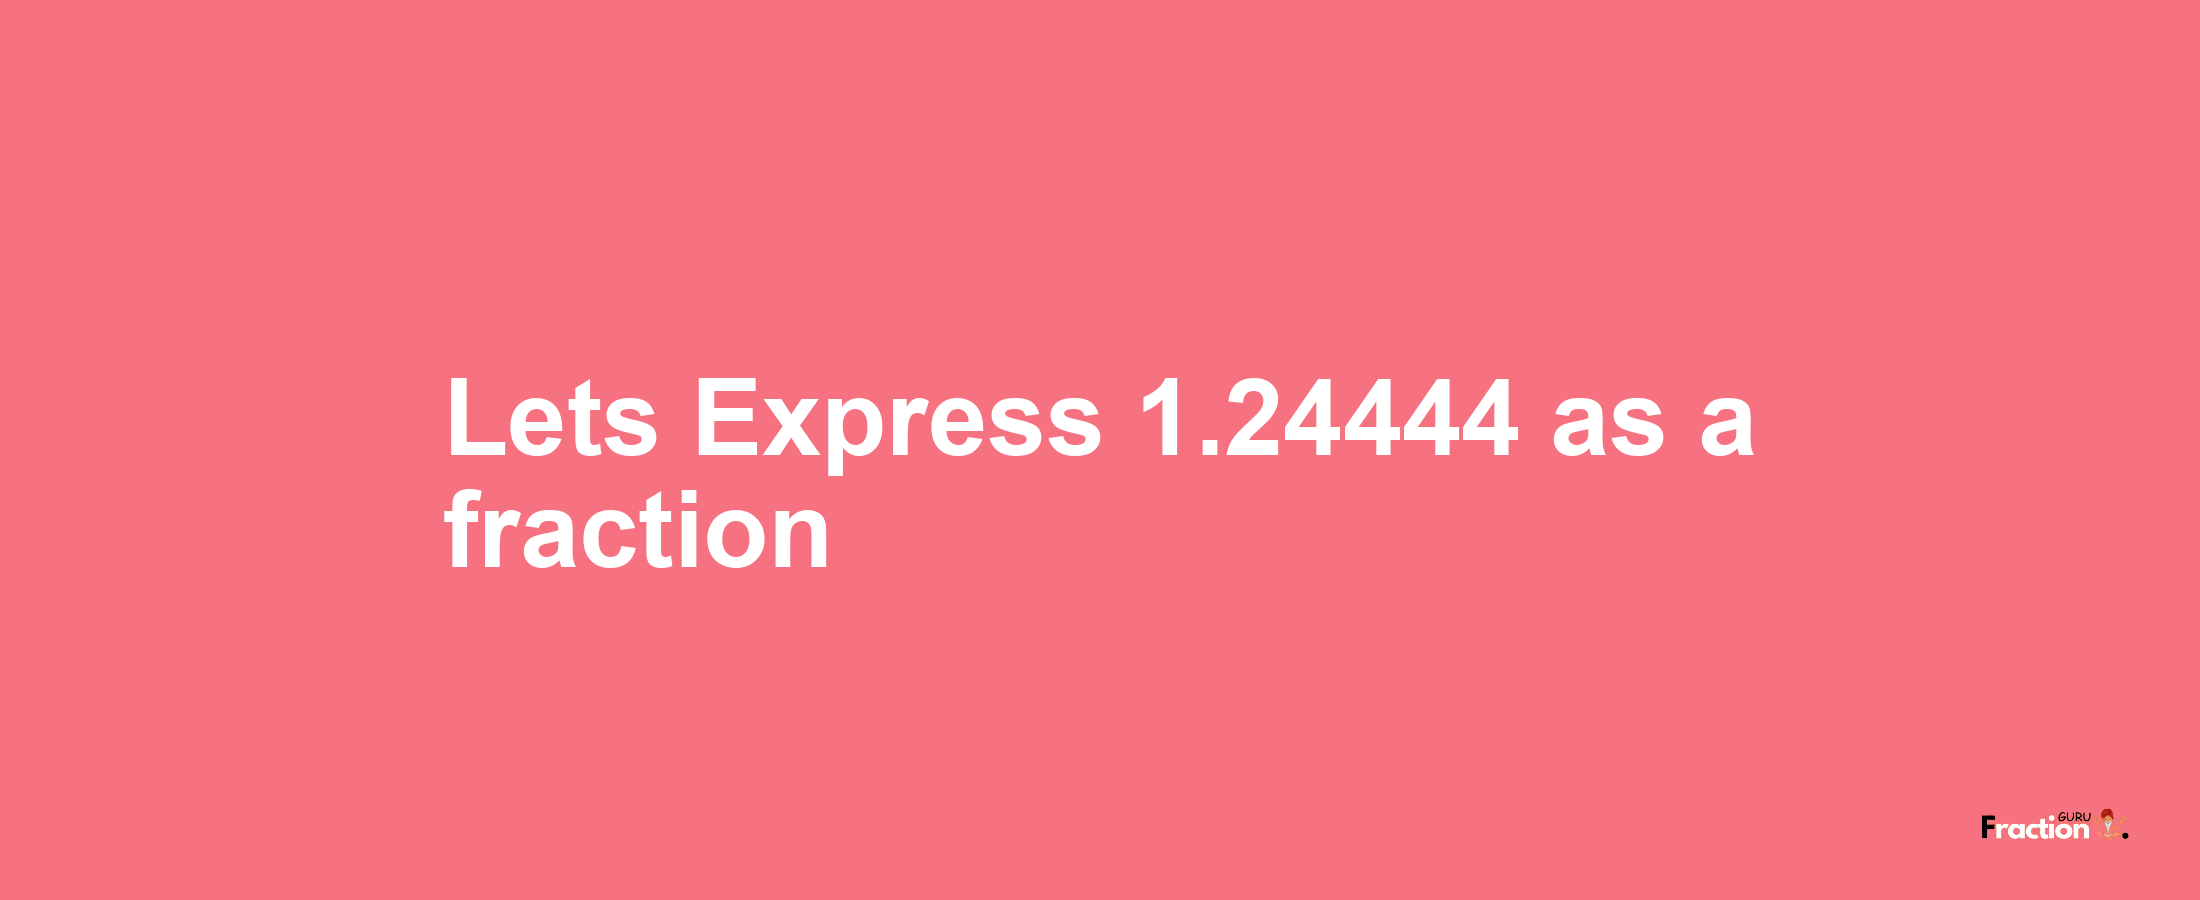 Lets Express 1.24444 as afraction